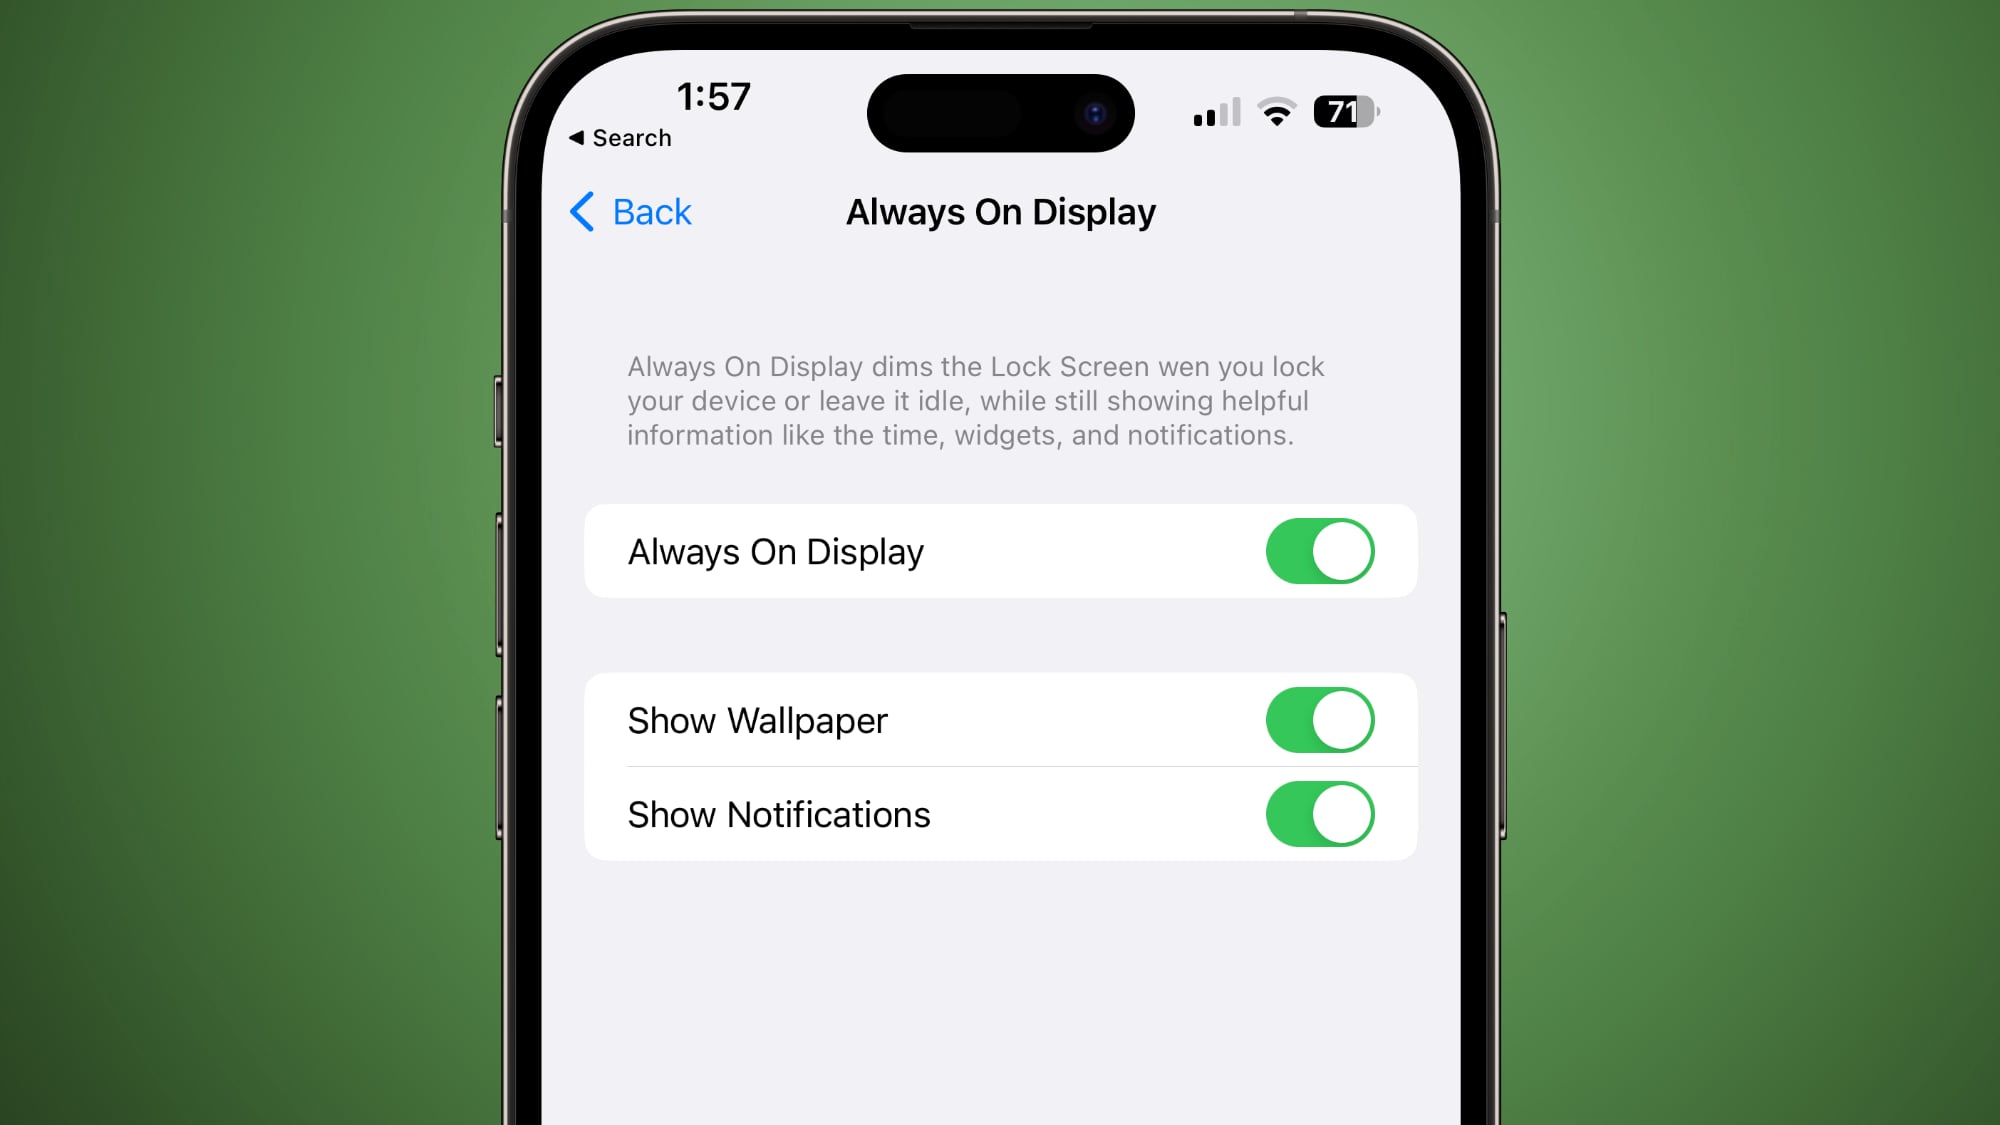 Latest iOS 16.2 Beta Lets You Disable Wallpaper and Notifications for Always On Display